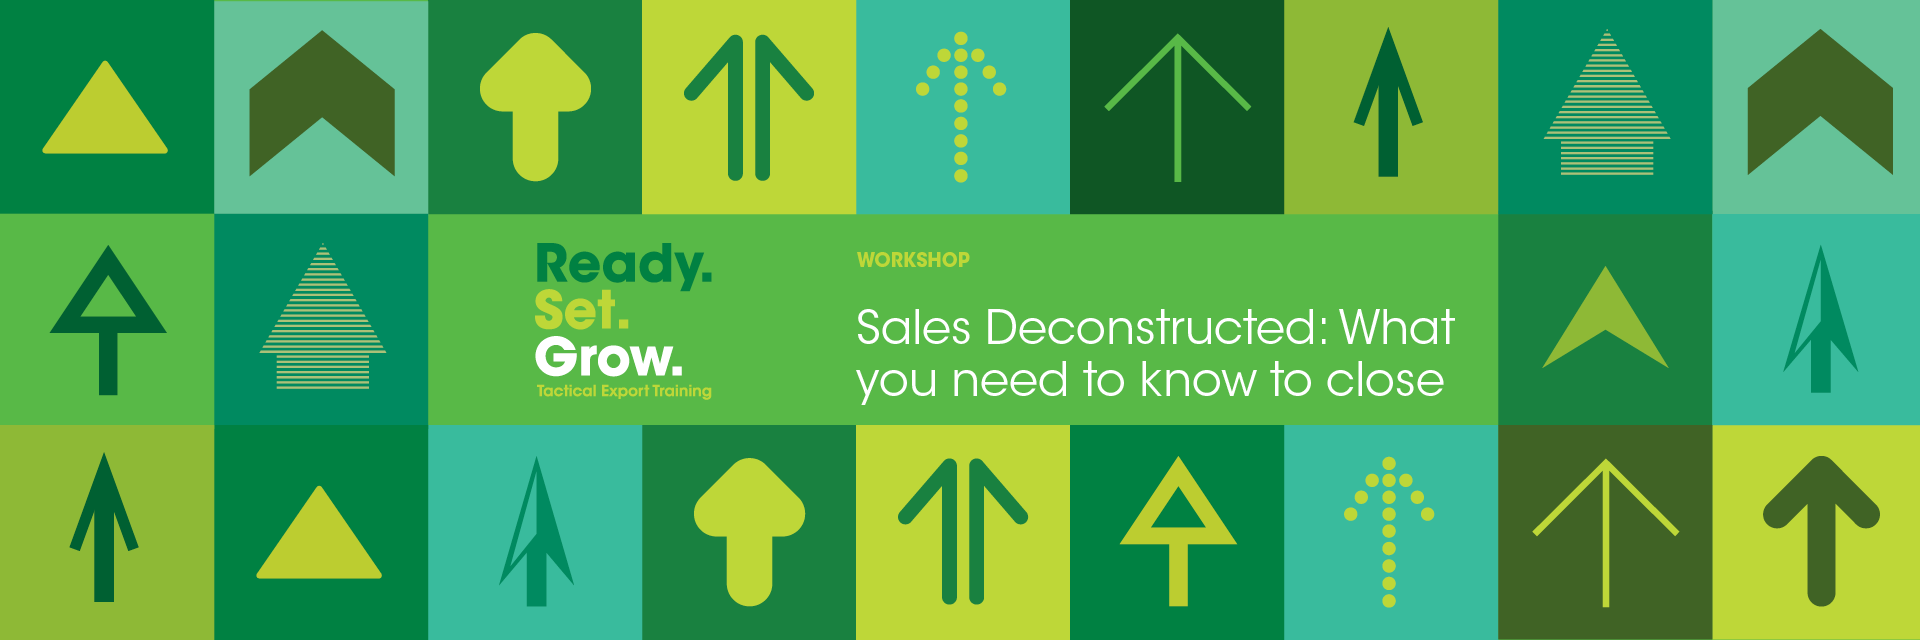 Sales Deconstruction: What You Need to Know to Close